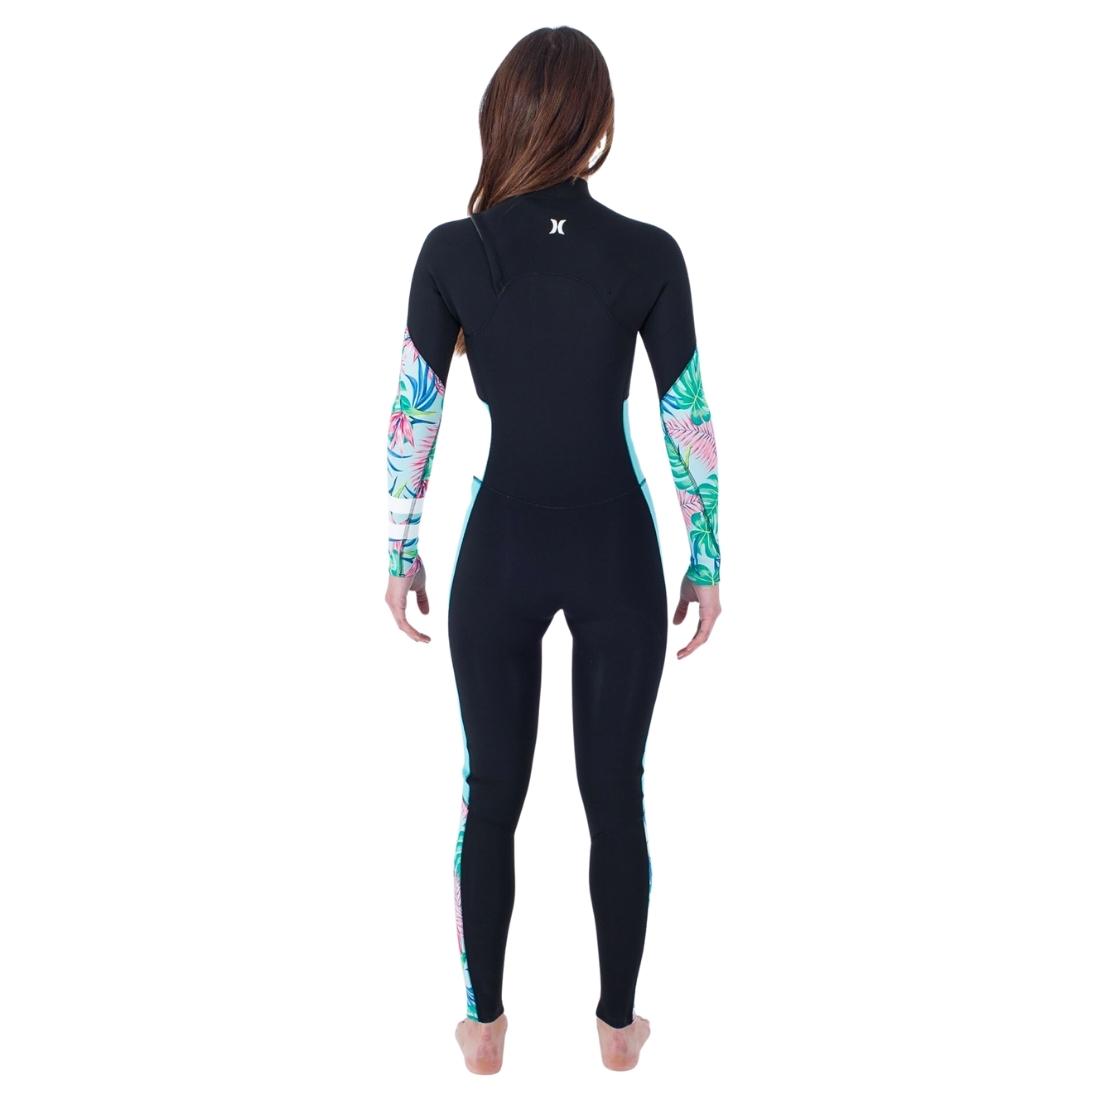 Hurley Womens Plus Printed 3/2mm Chest Zip Full Wetsuit - Java Tropical - Womens Full Length Wetsuit by Hurley